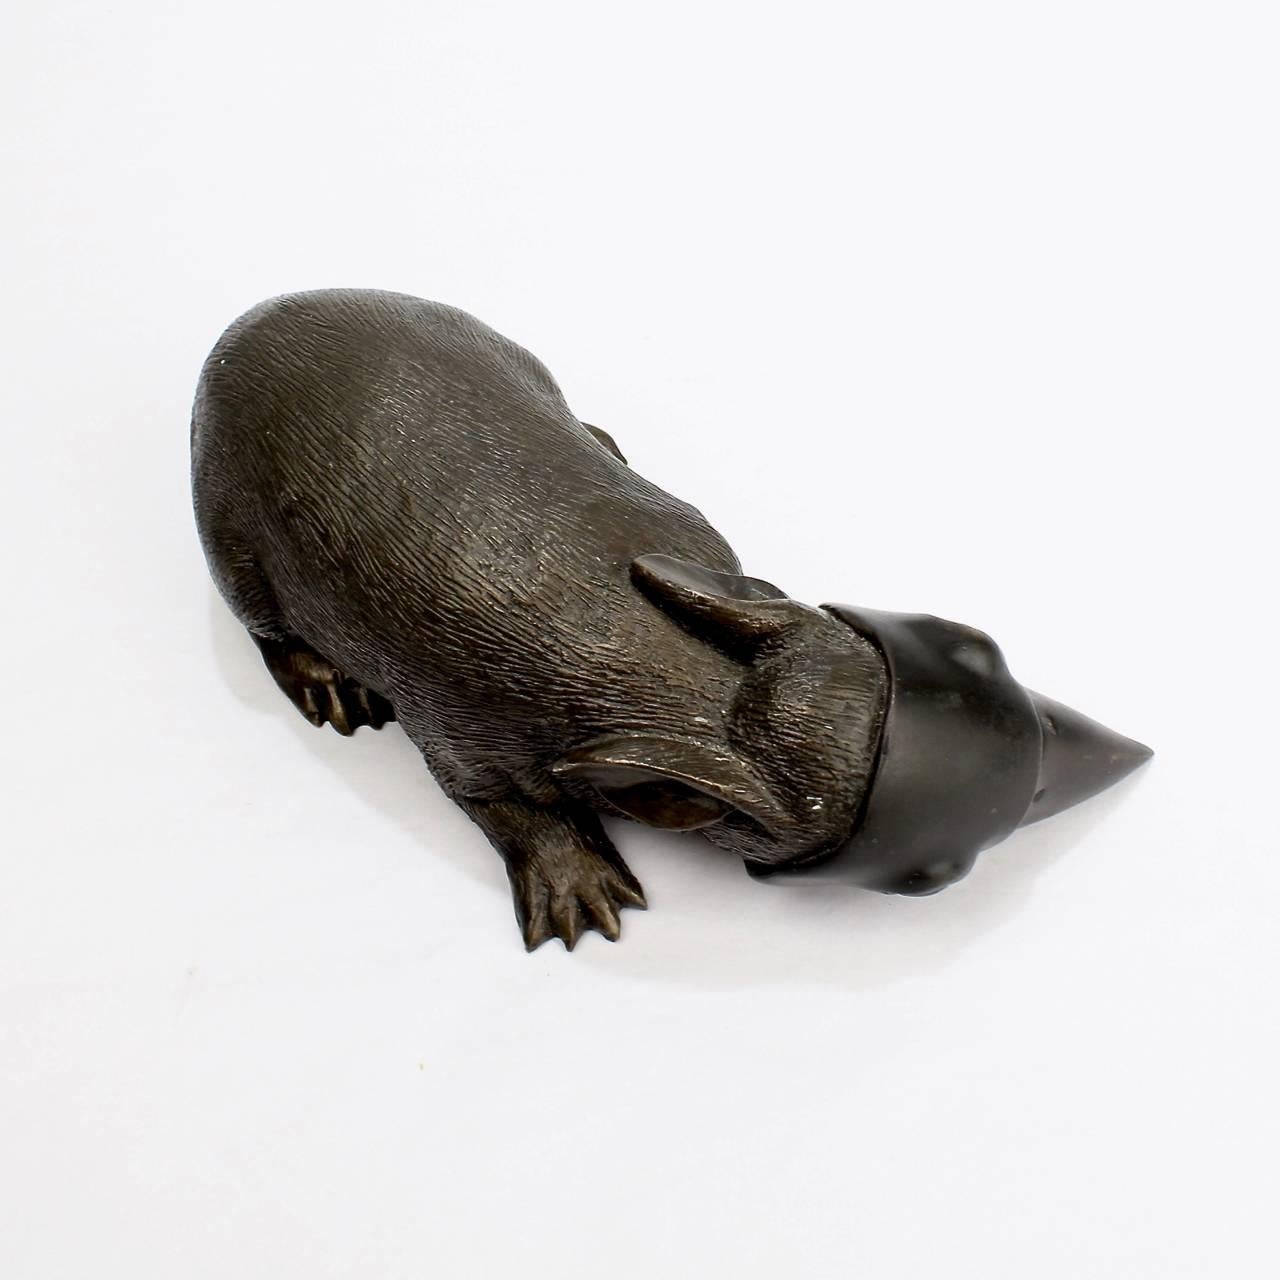 Darla Jackson Baby Bunny with Crow's Mask Bronze Sculpture, 2015 In Good Condition For Sale In Philadelphia, PA